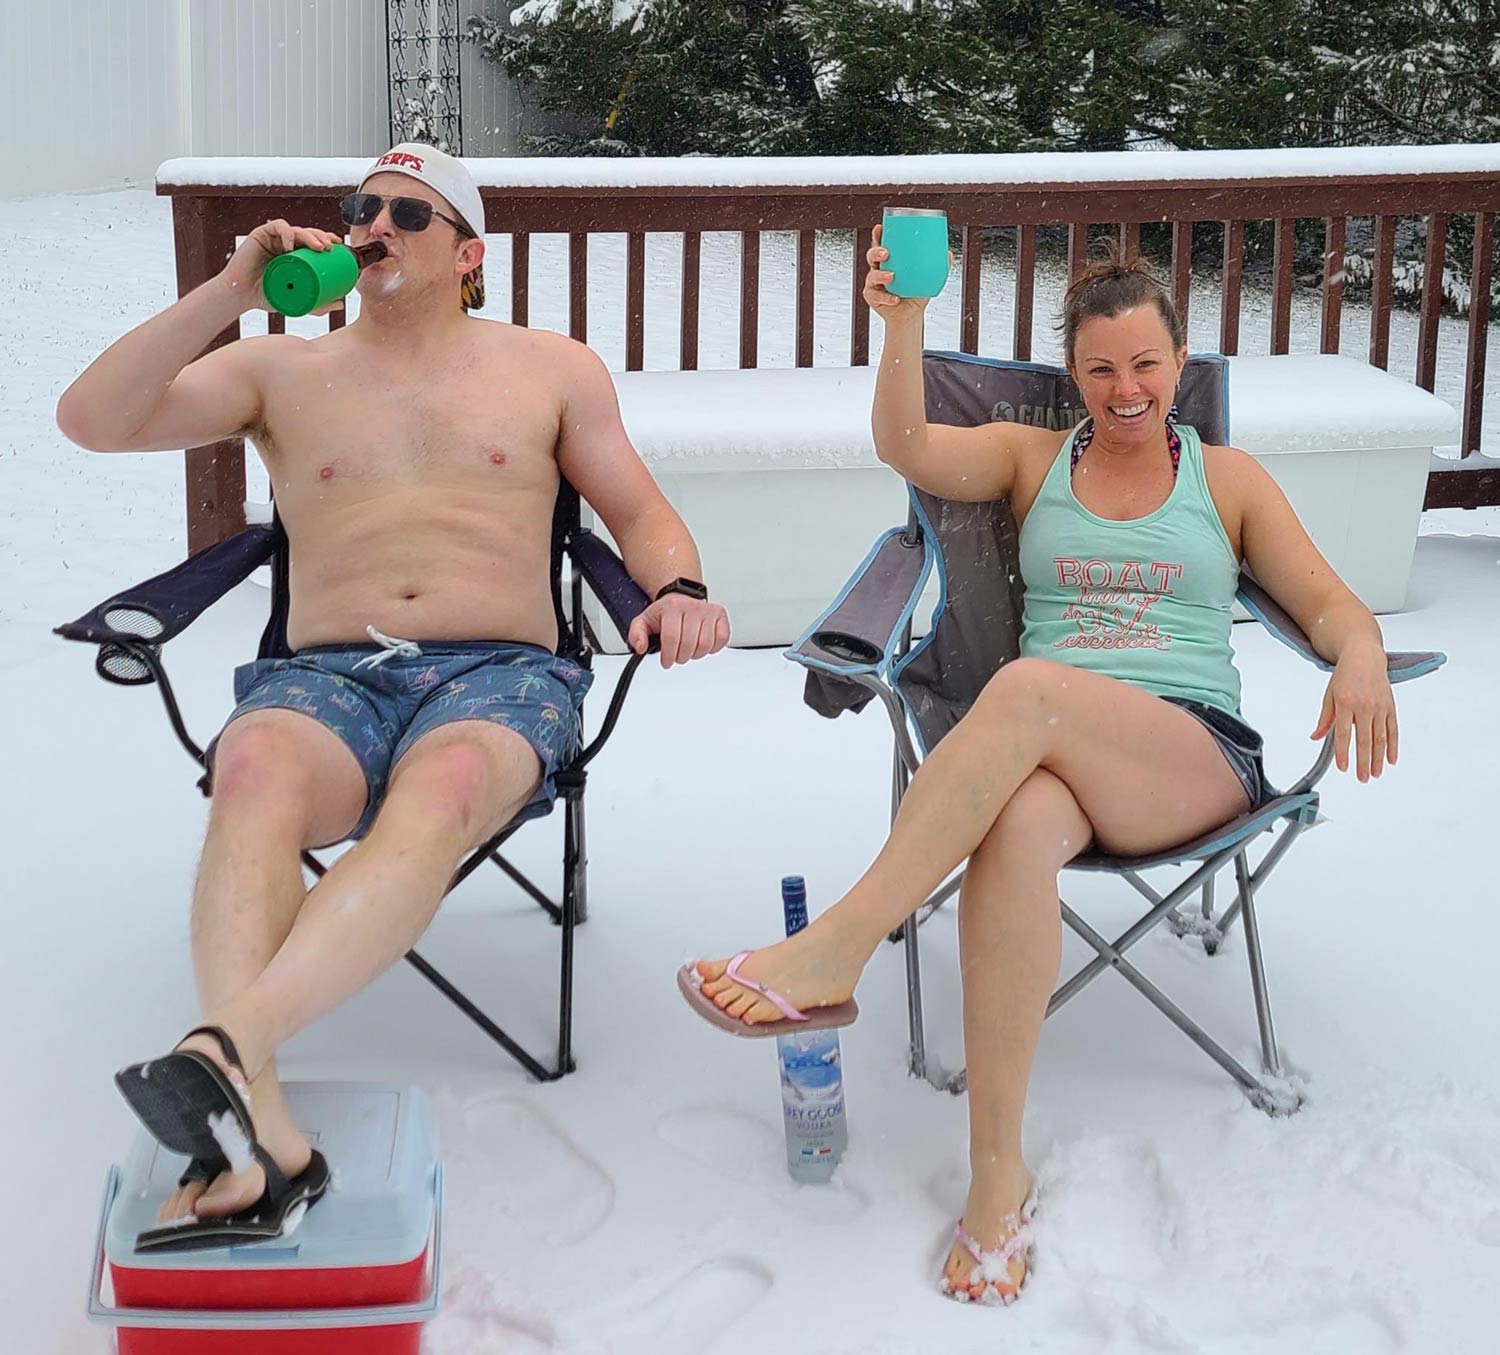 The wife and I enjoying the balmy MD weather